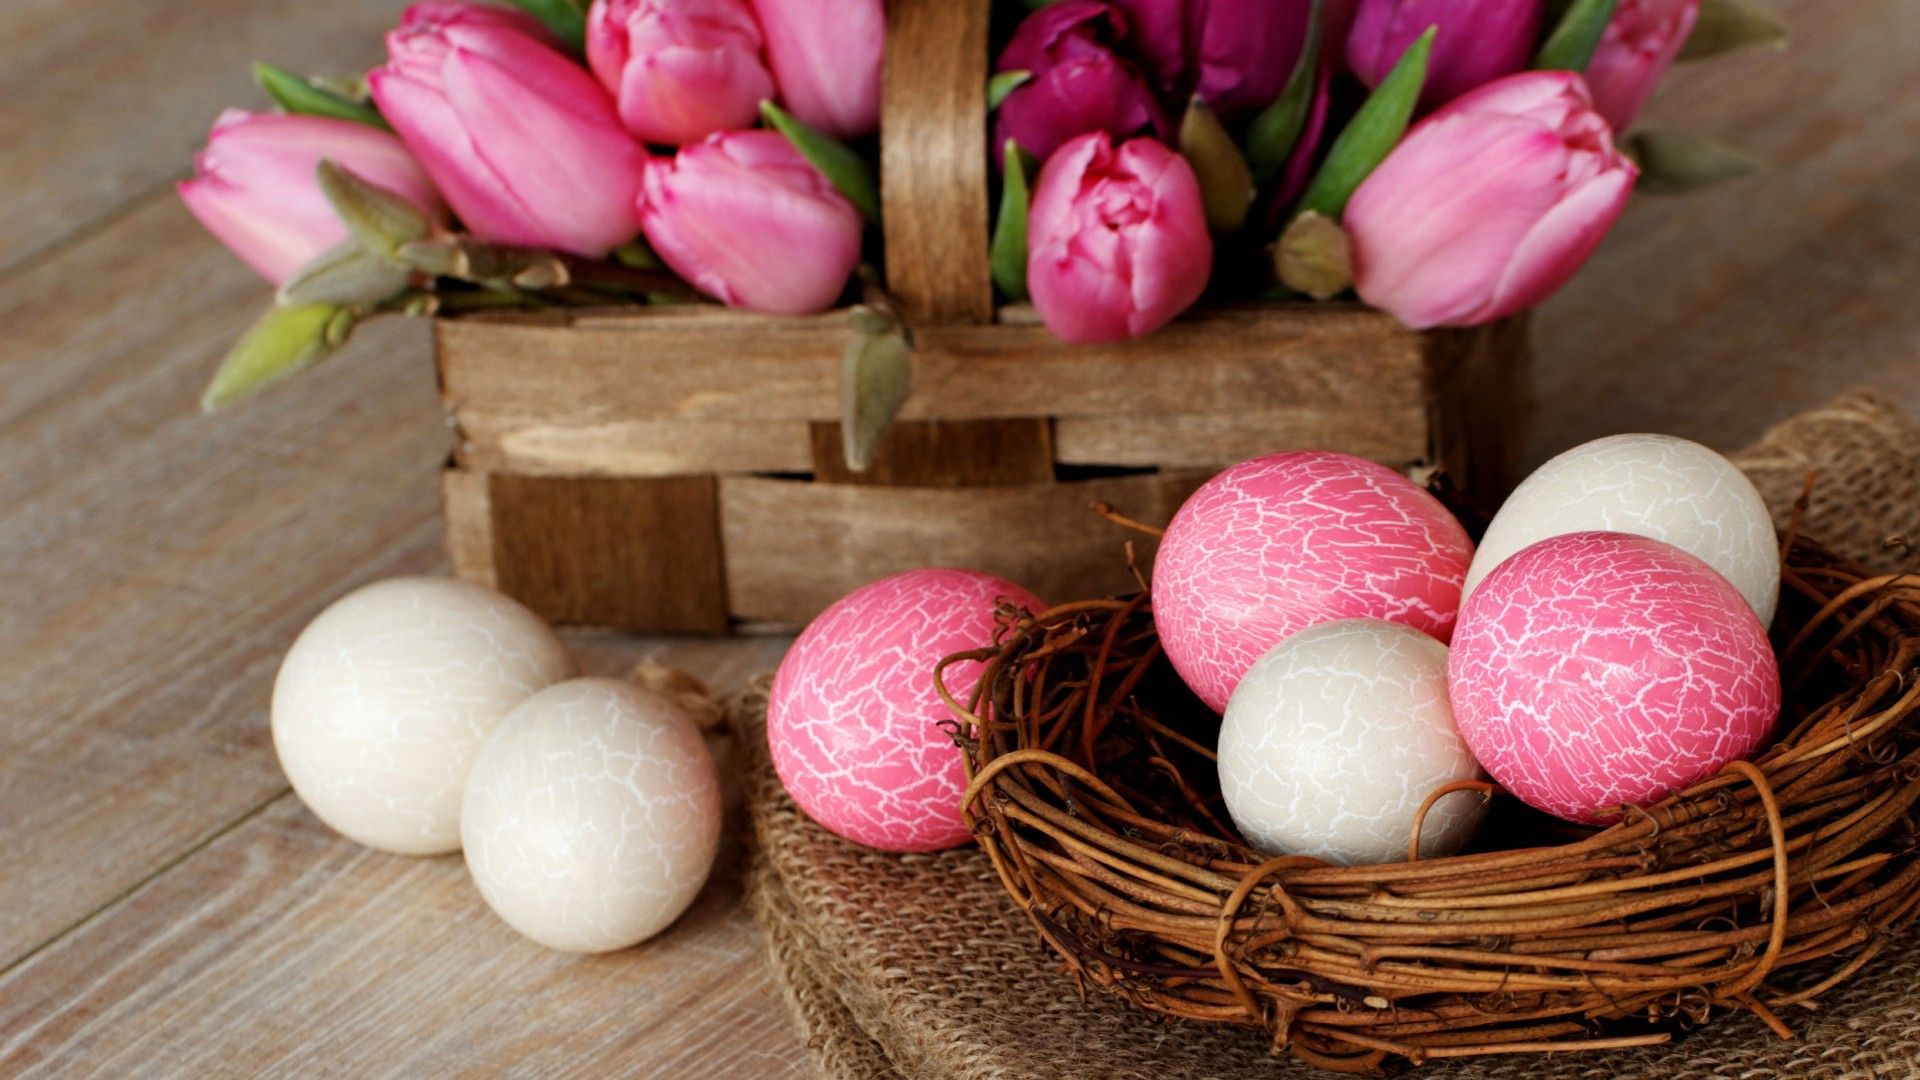 White and pink eggs for Easter wallpaper and image